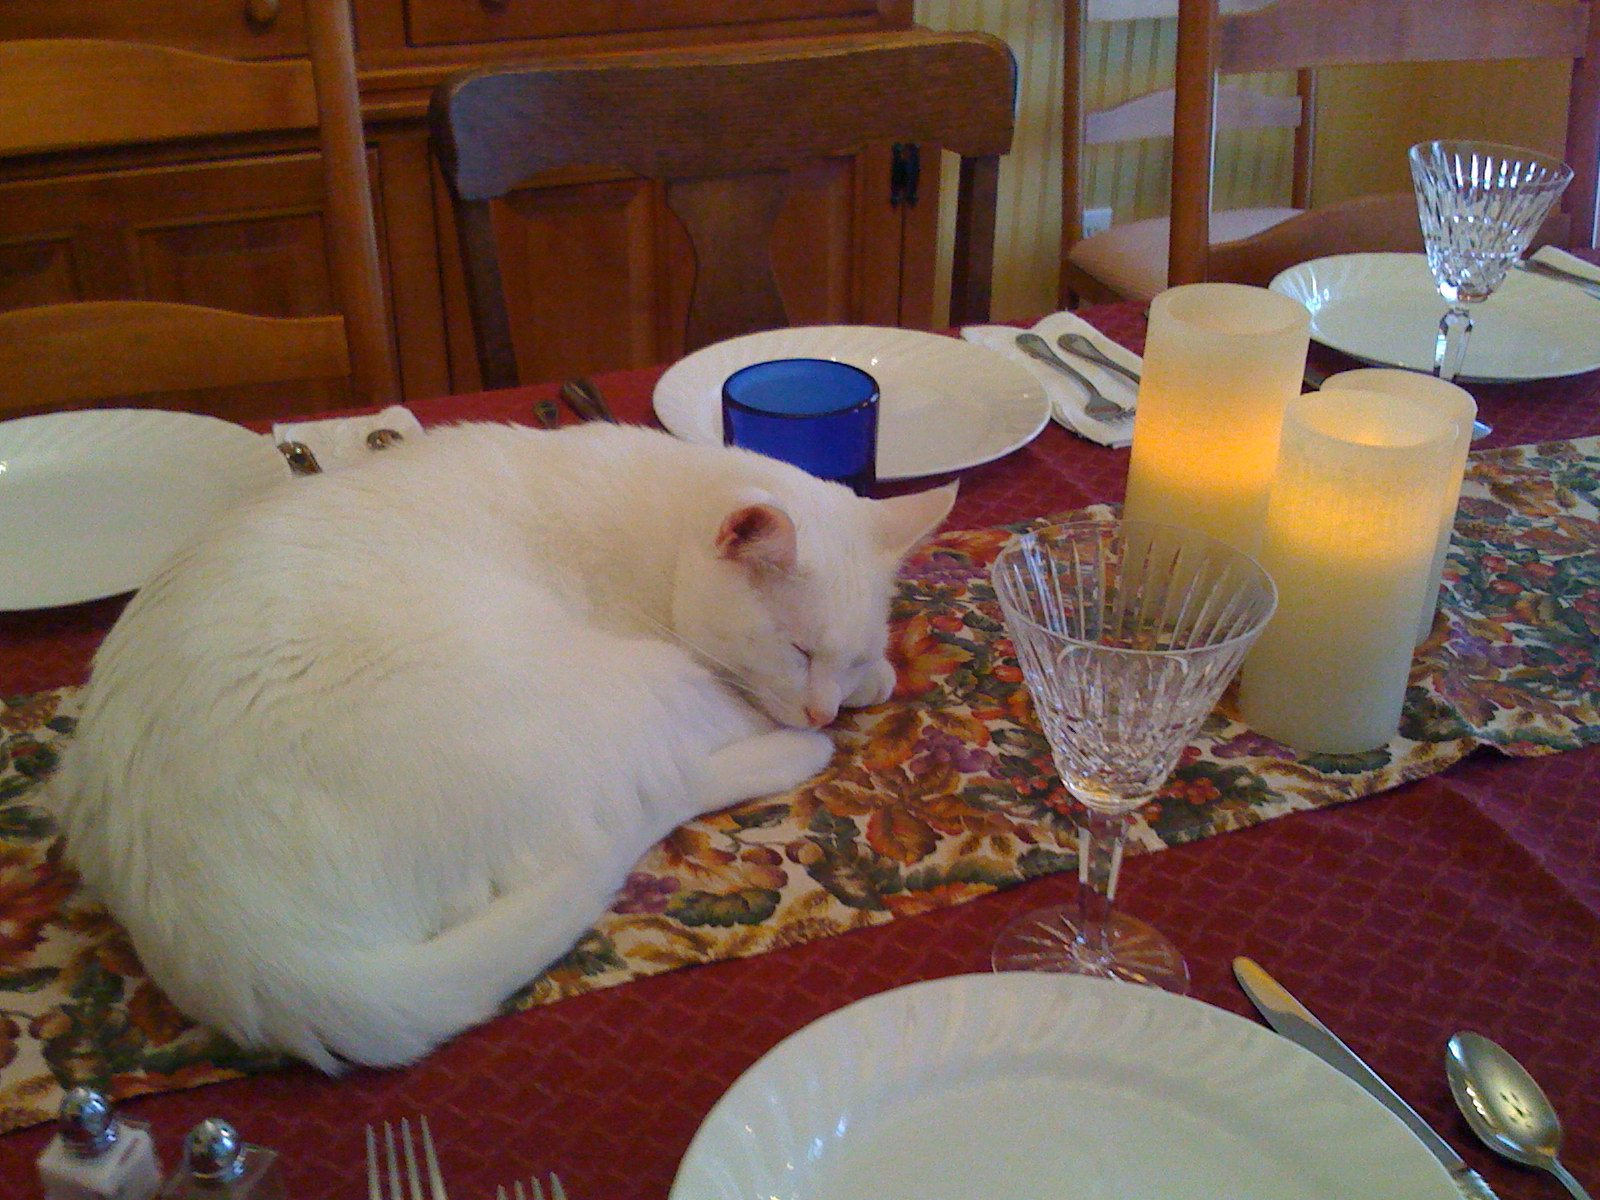 Waiting For Dinner (user submitted)